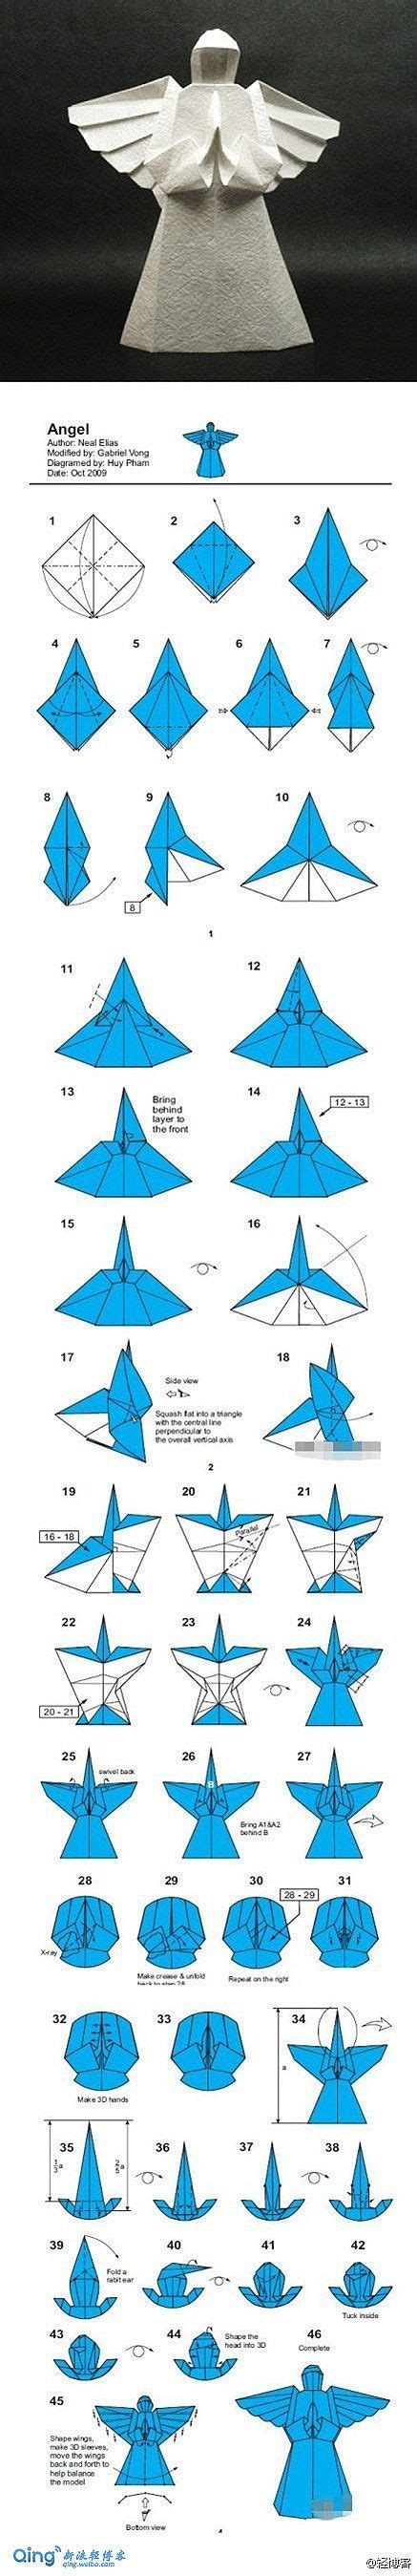 easy origami angel instructions origami angel paper craft